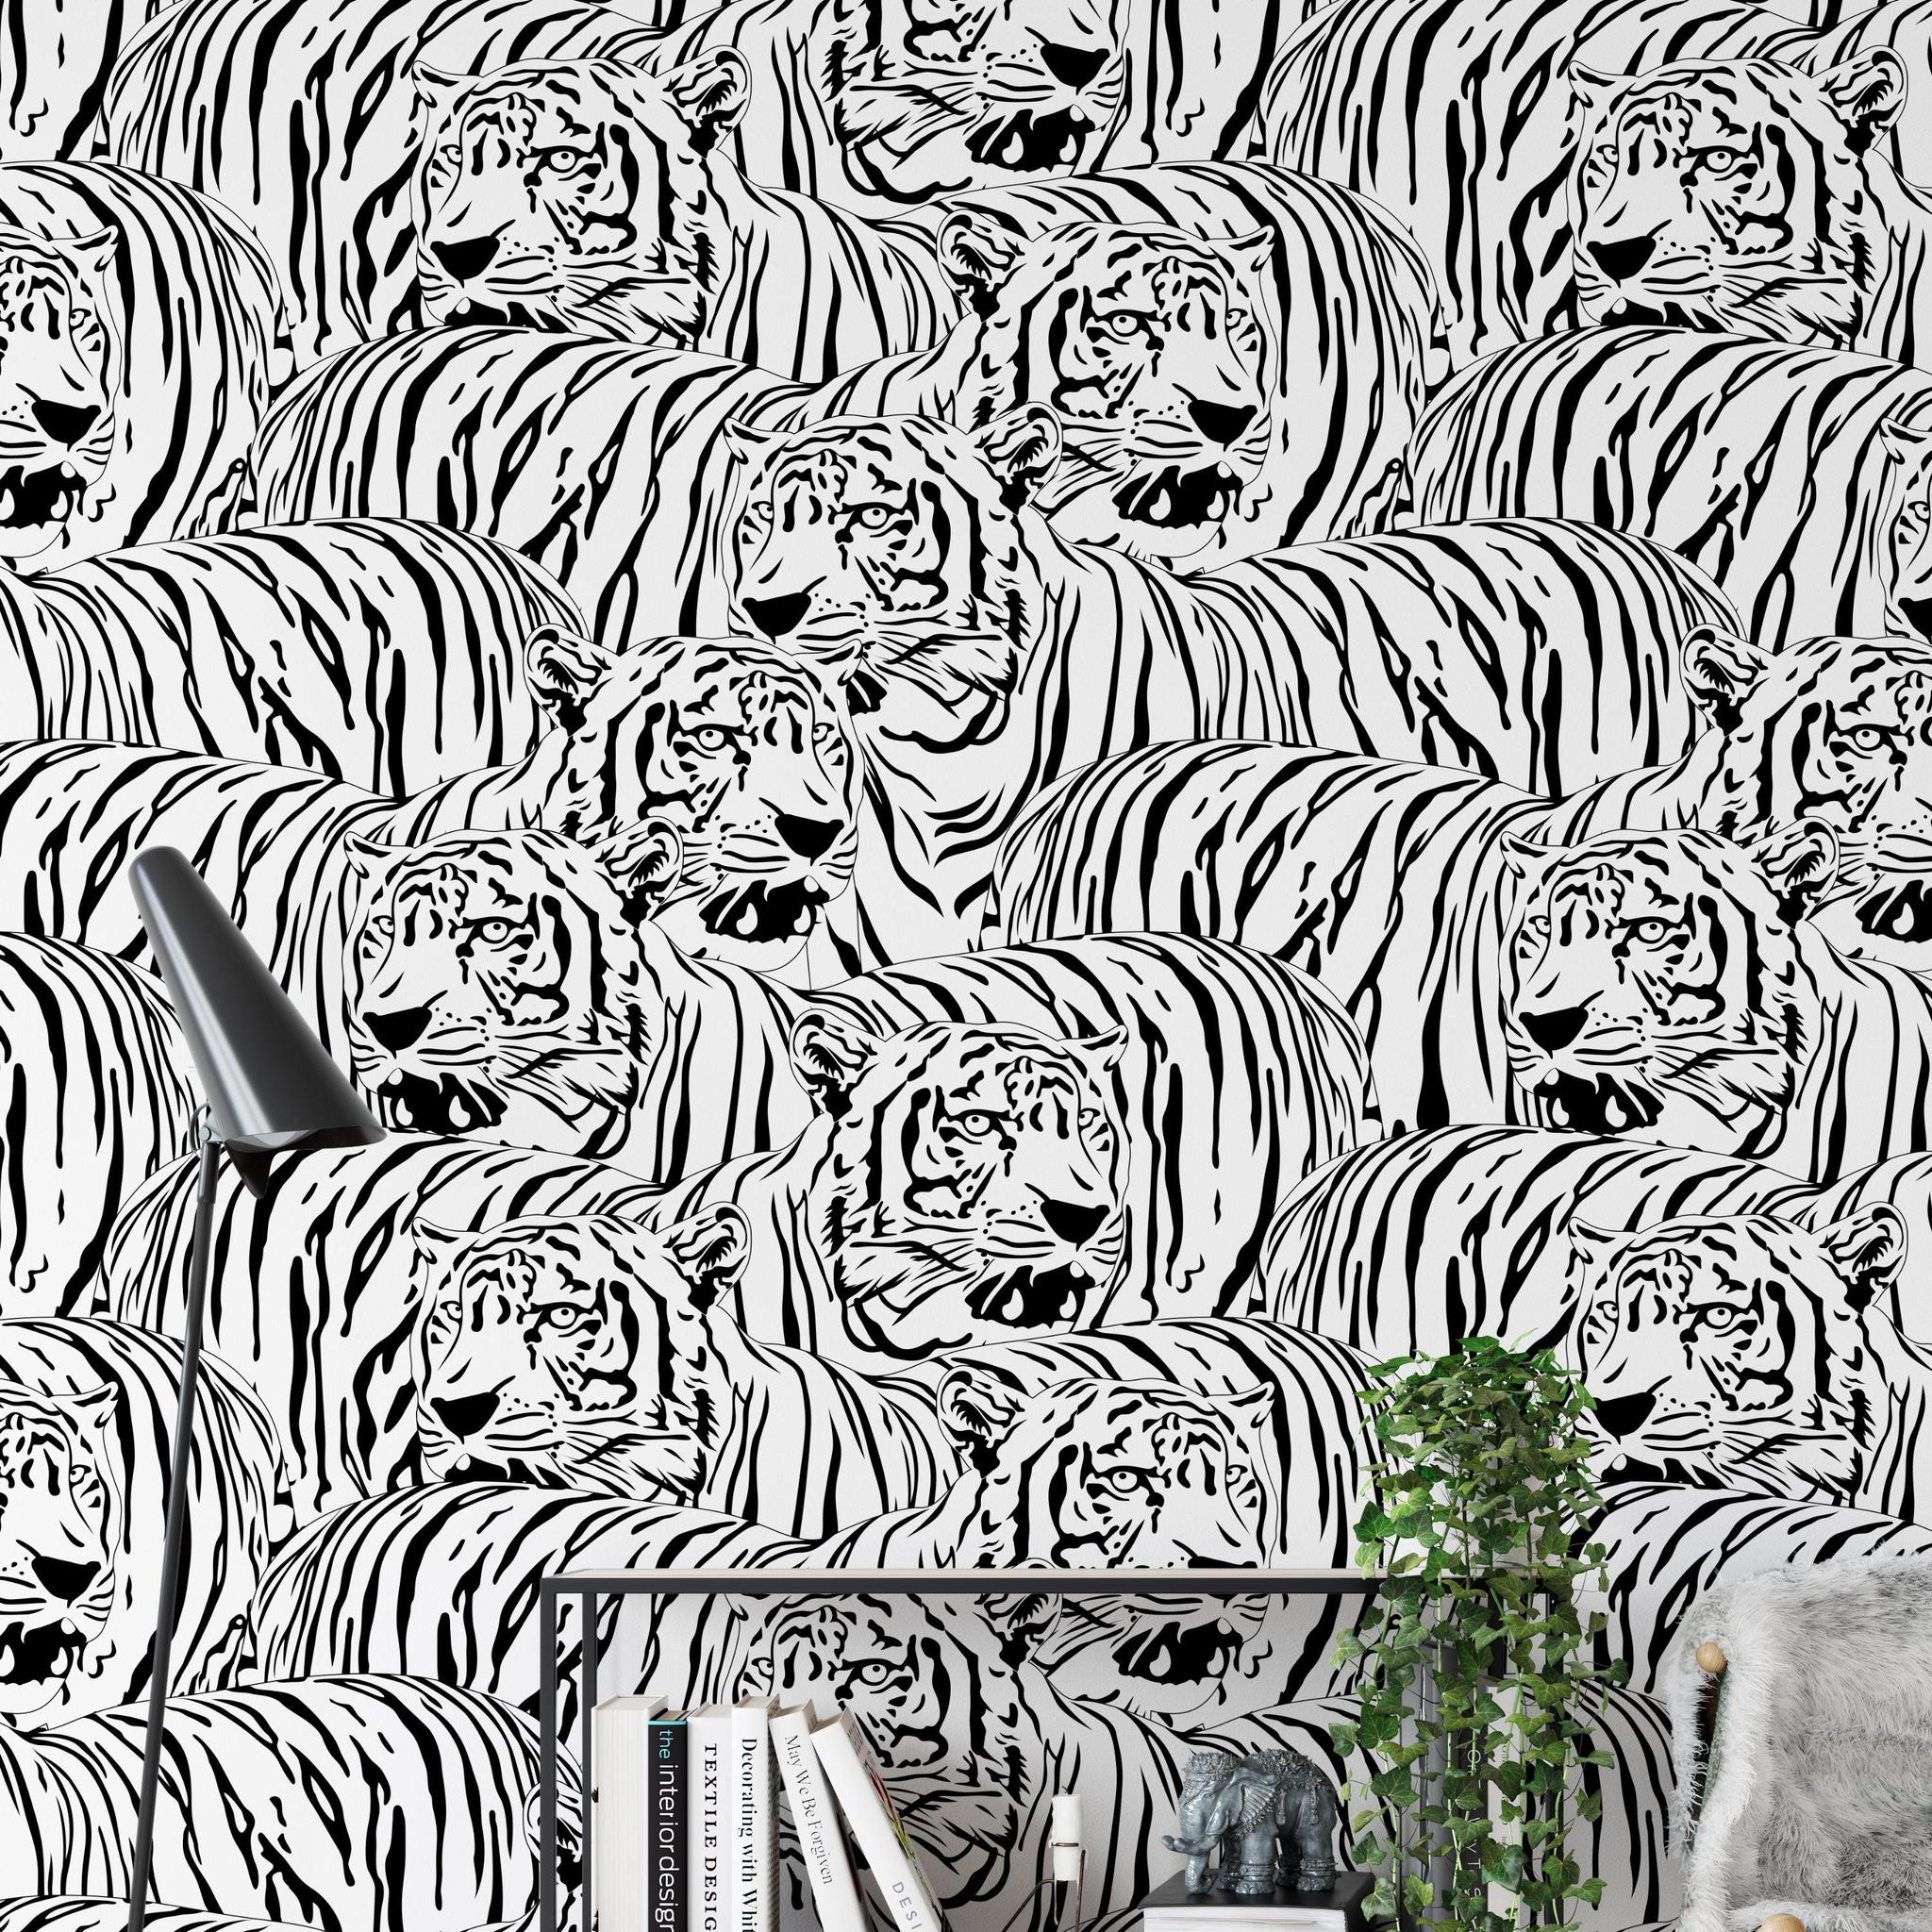 Raja Wallpaper by Wall Blush SG02, featuring bold tiger pattern in a stylish home office setup.
